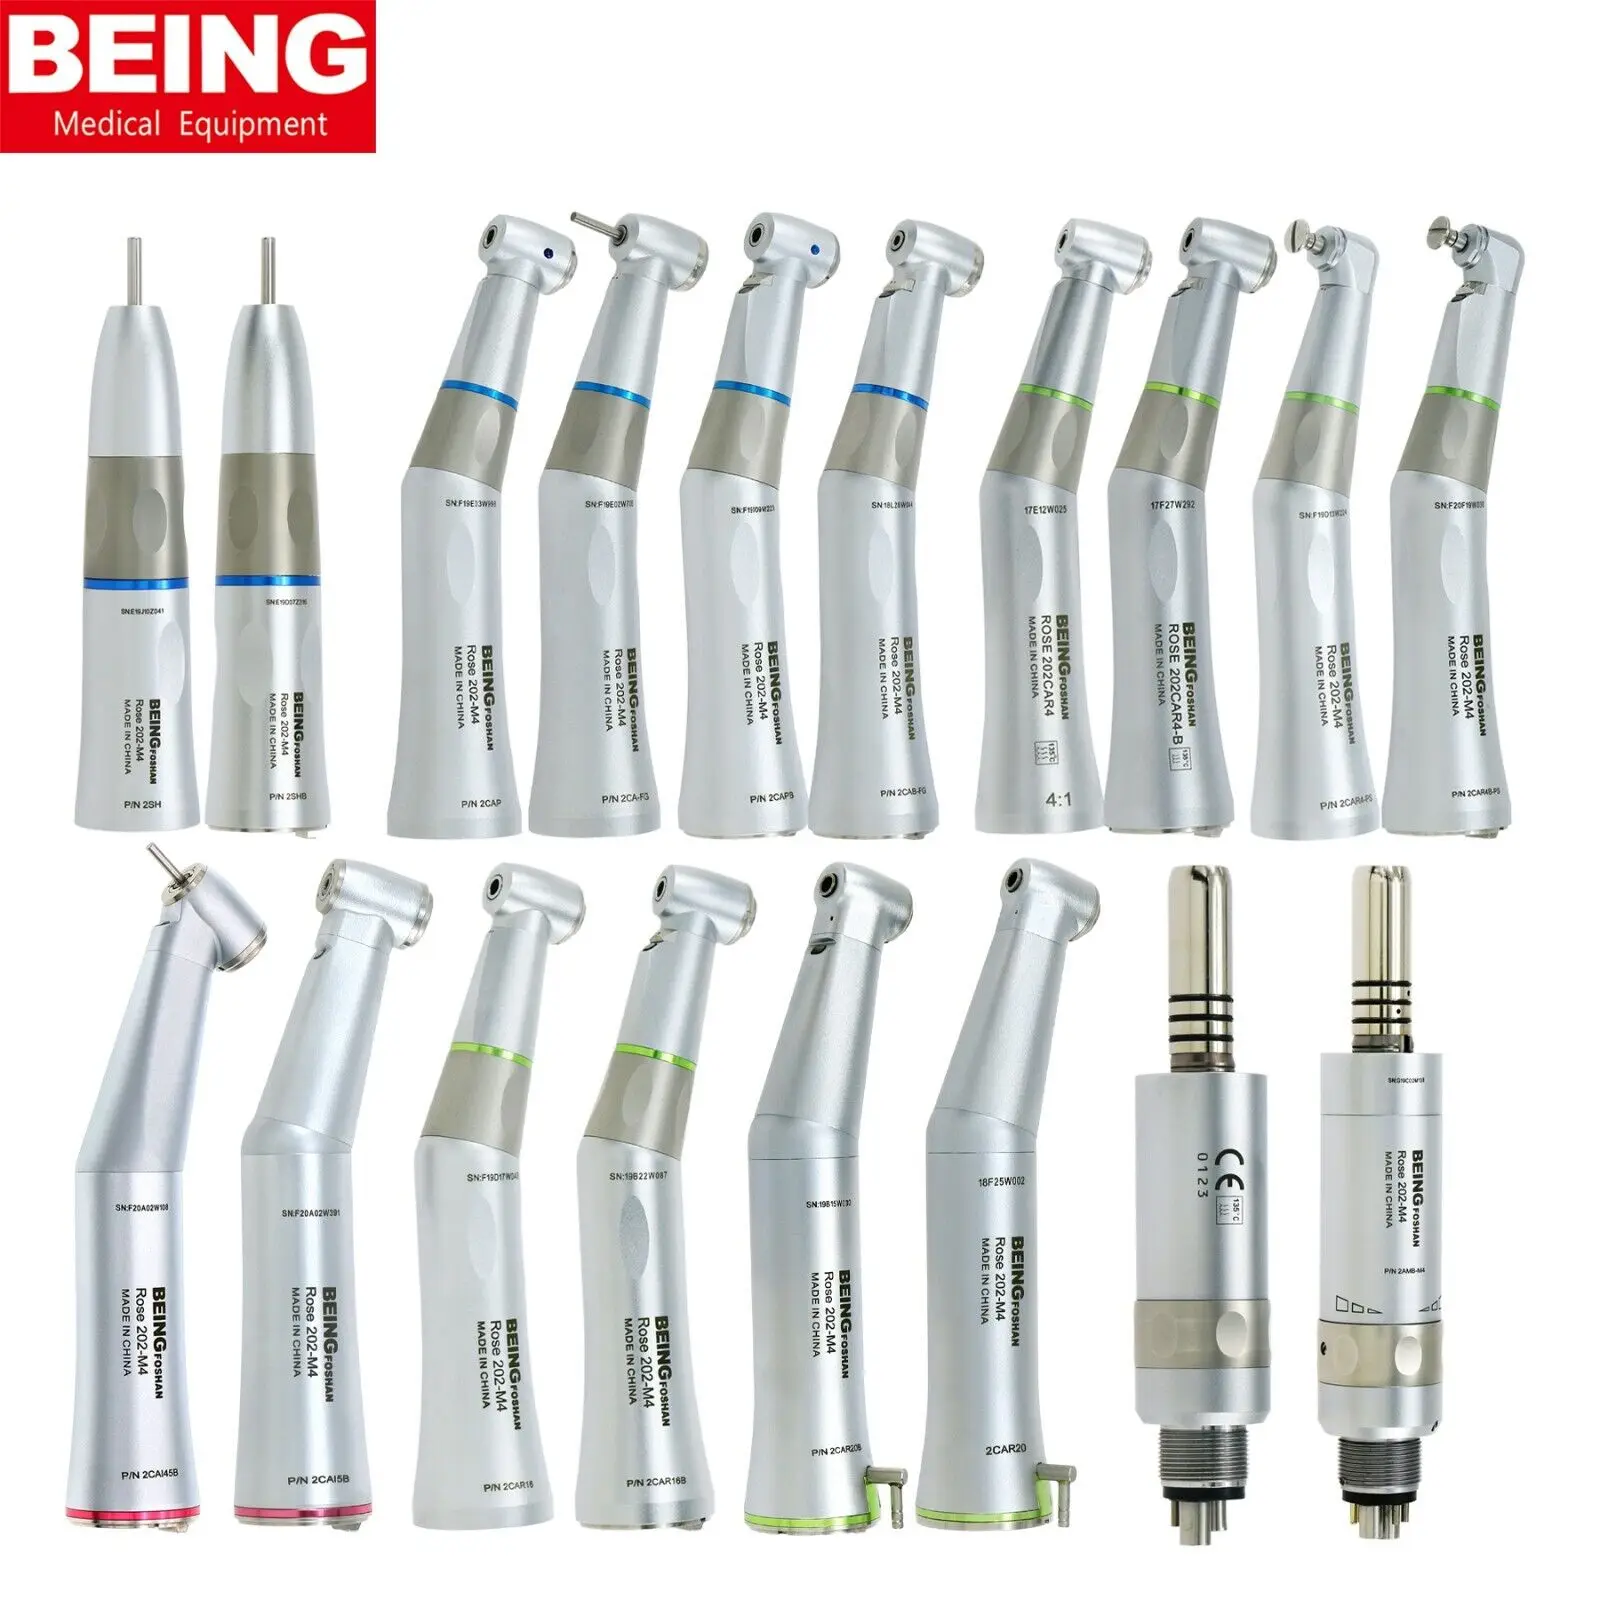 BEING Dental High Low Speed Fiber Optic 20:1 16:1 4:1 1:1 1:5 Fiber Optic Straight Contra Angle handpiece